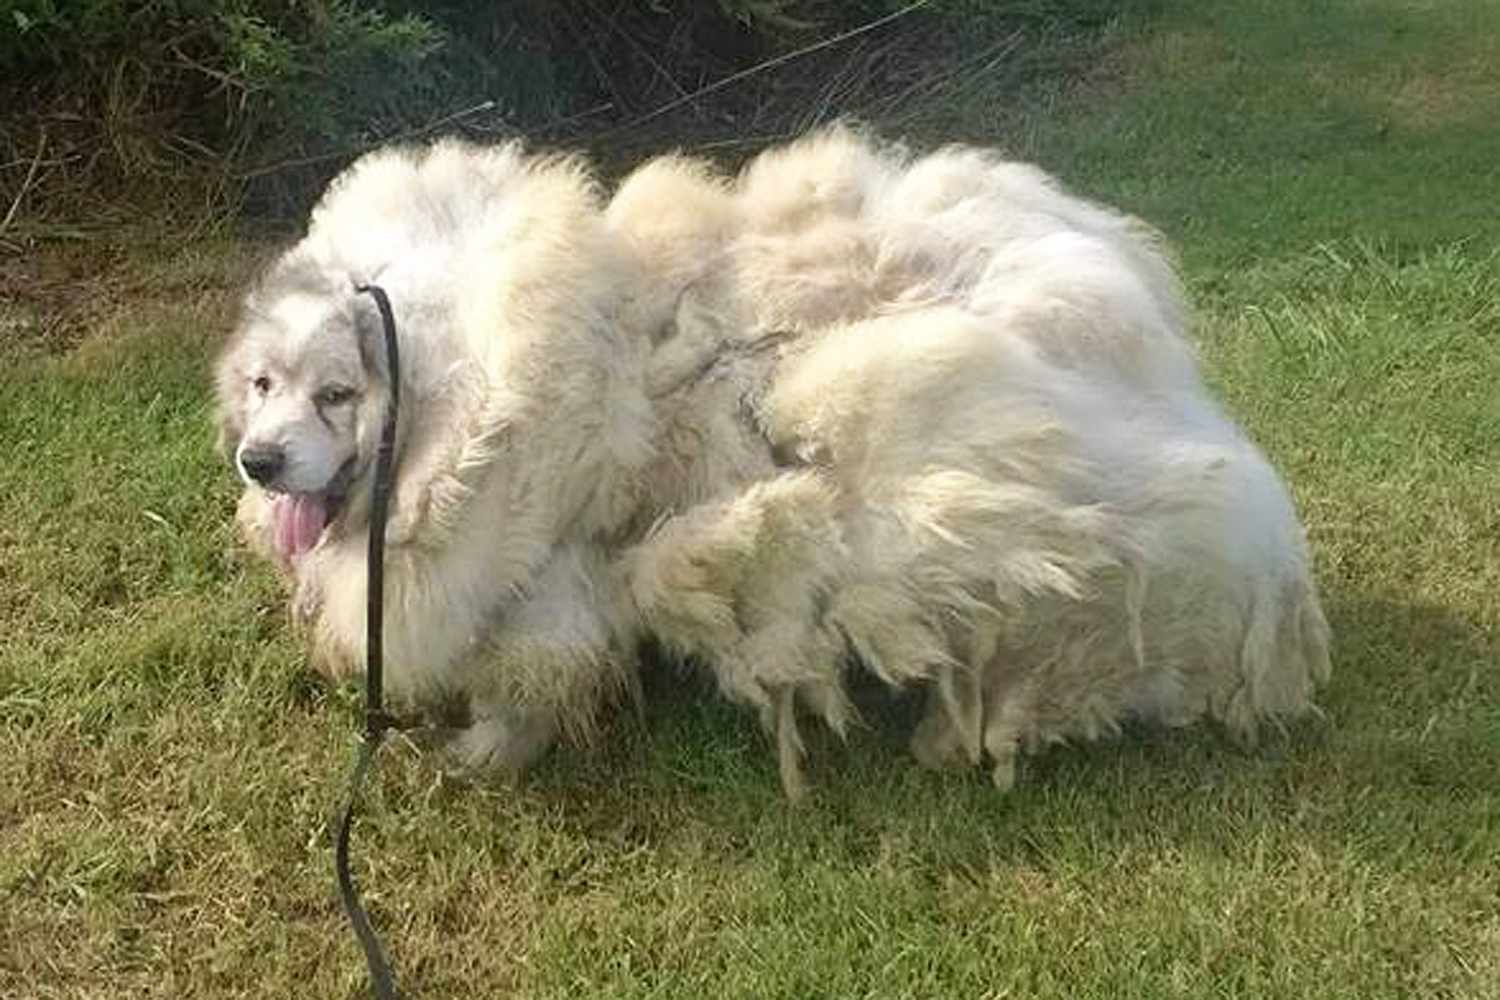 Dog Sheds 35 Lbs of Matted Fur | PEOPLE.com